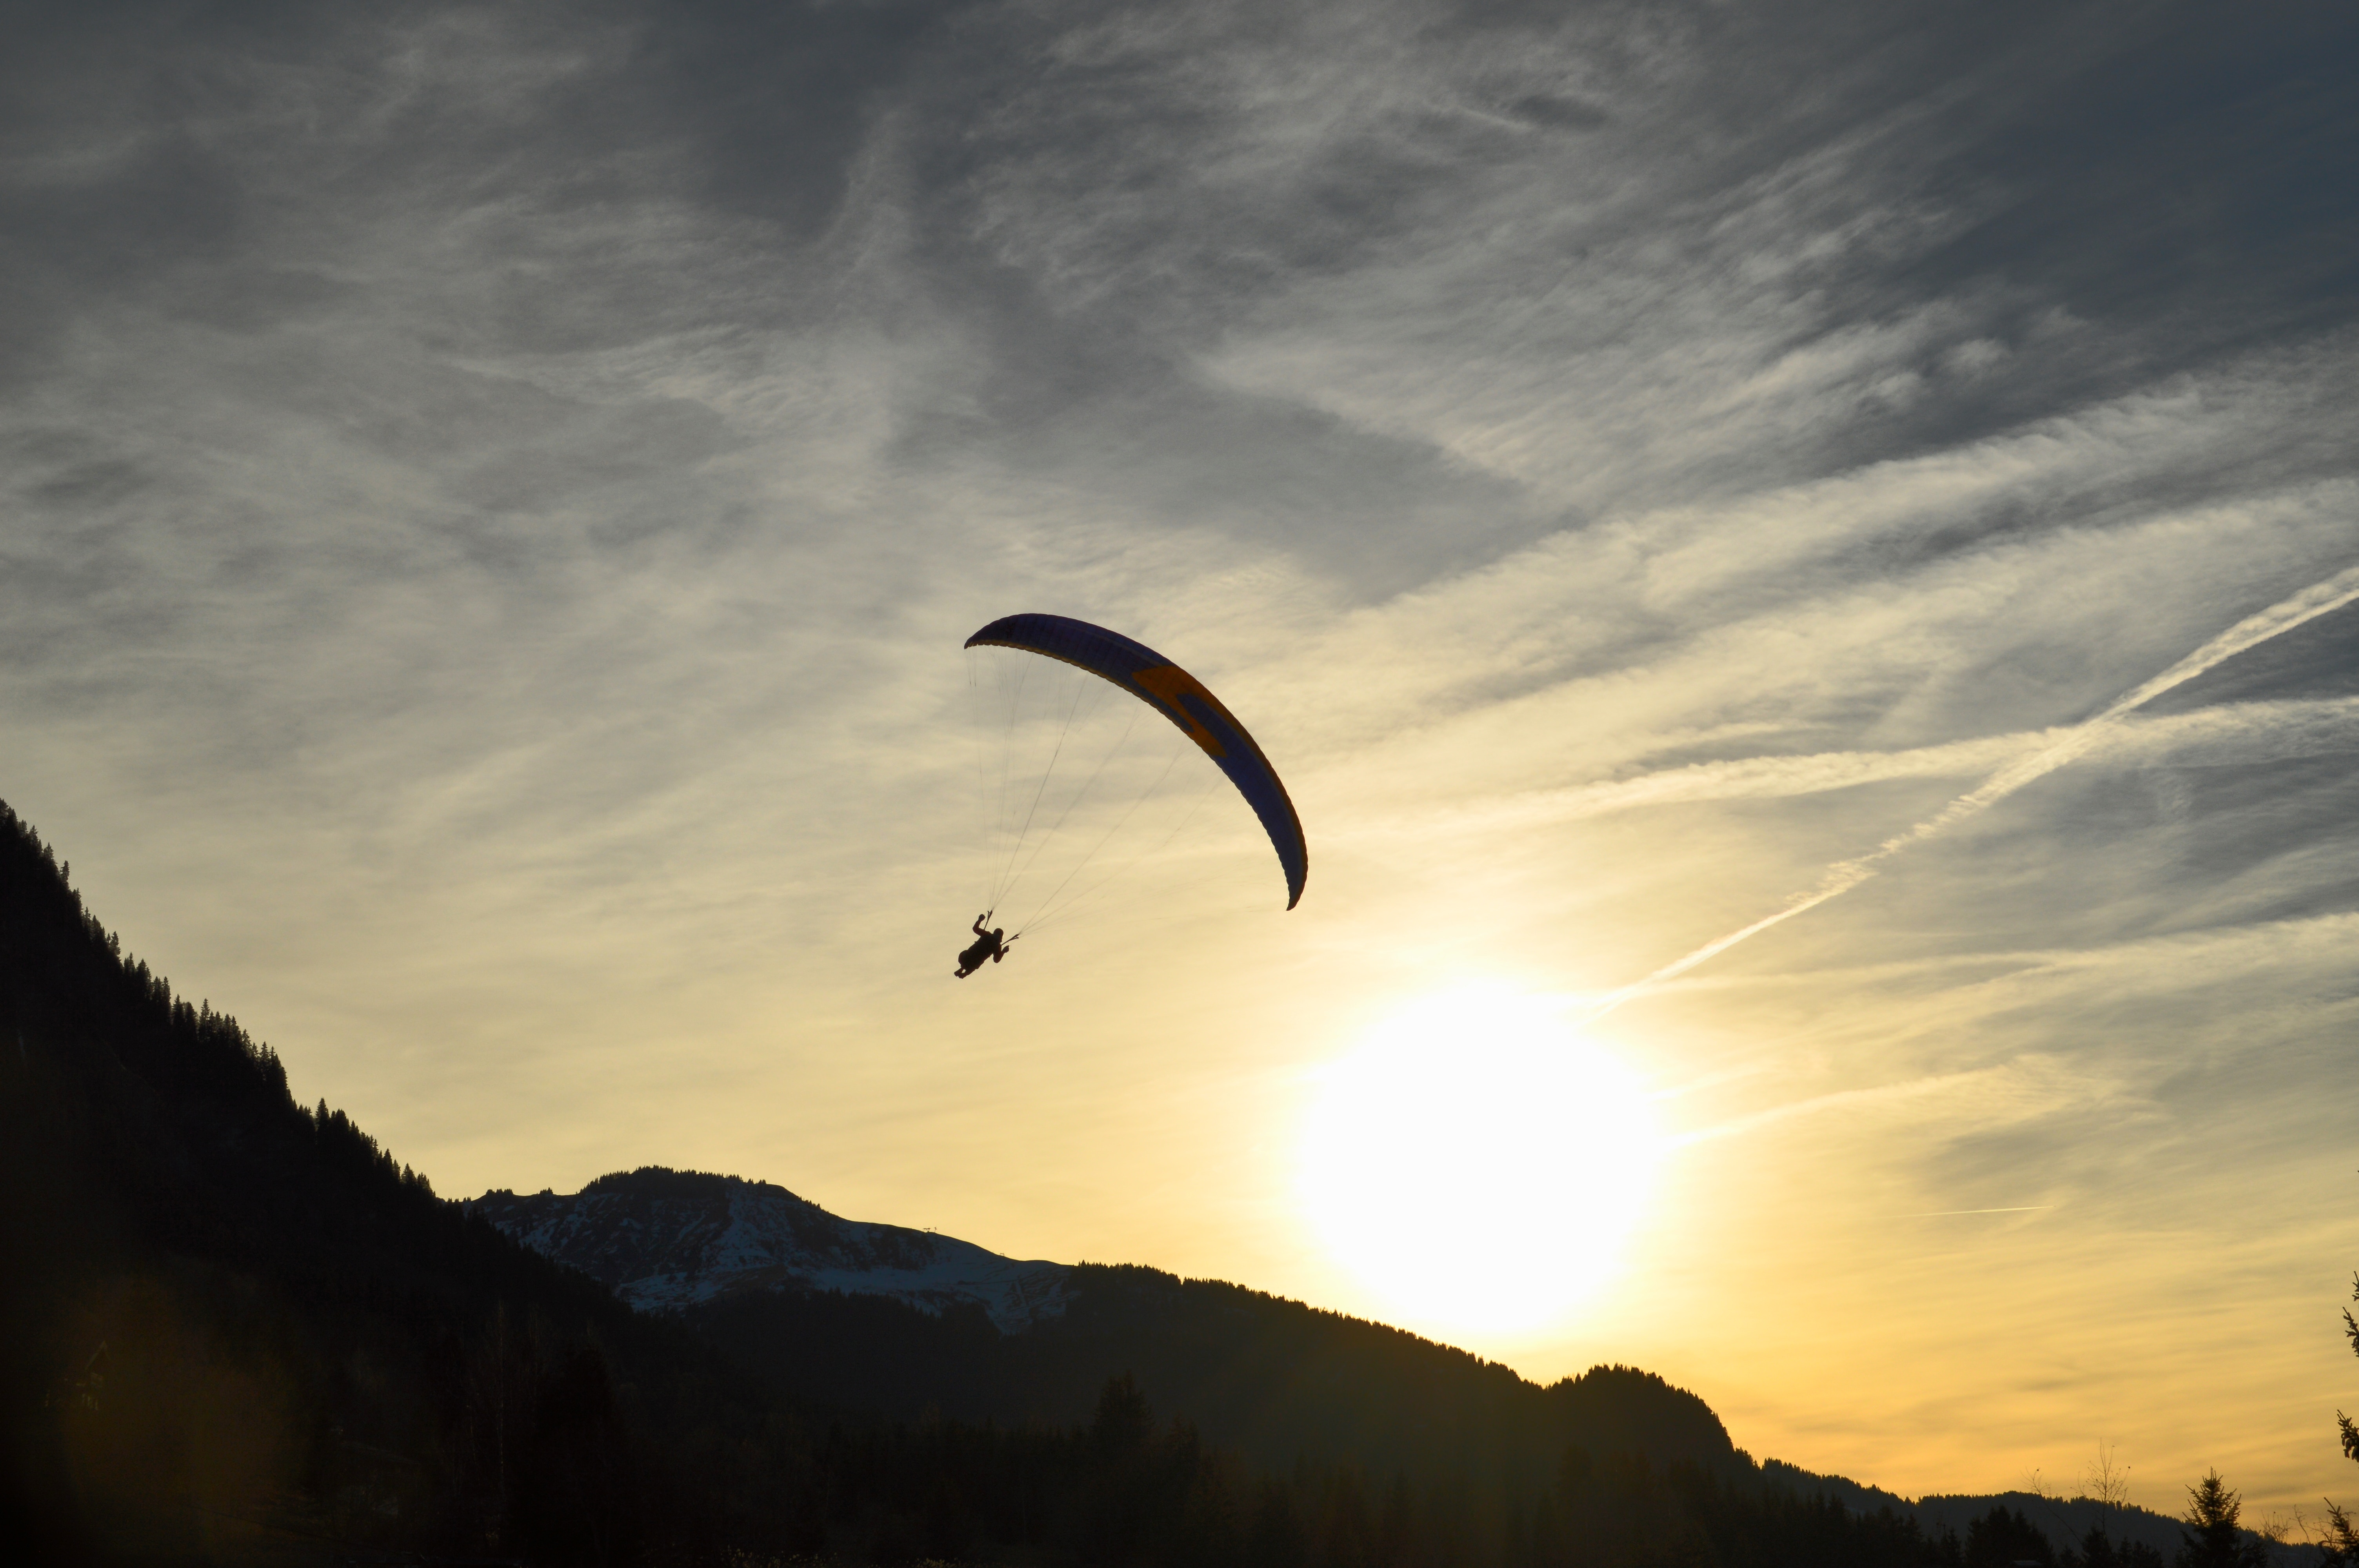 Person parachuting during a sunset.